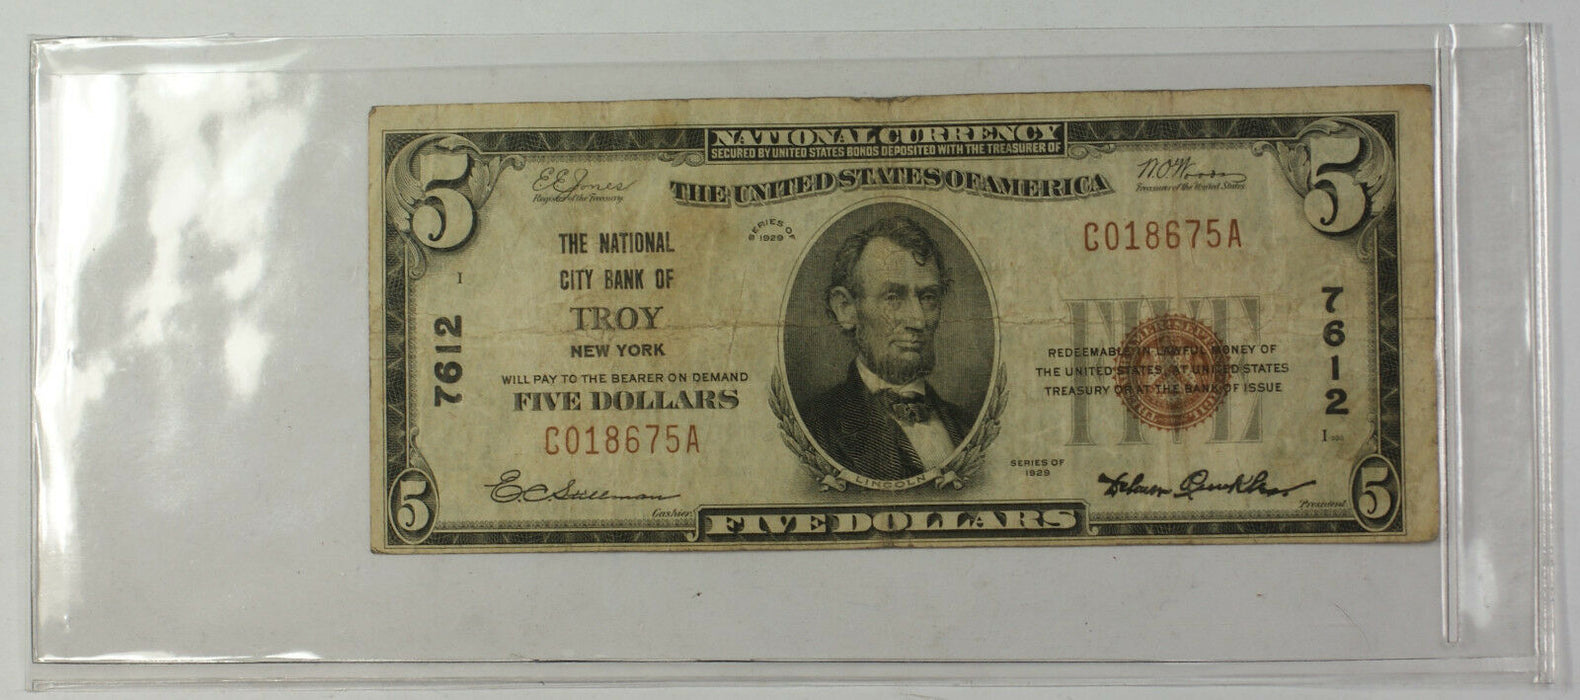 Series 1929 Type 1 $5 National Currency Banknote Troy New York Charter # 7612